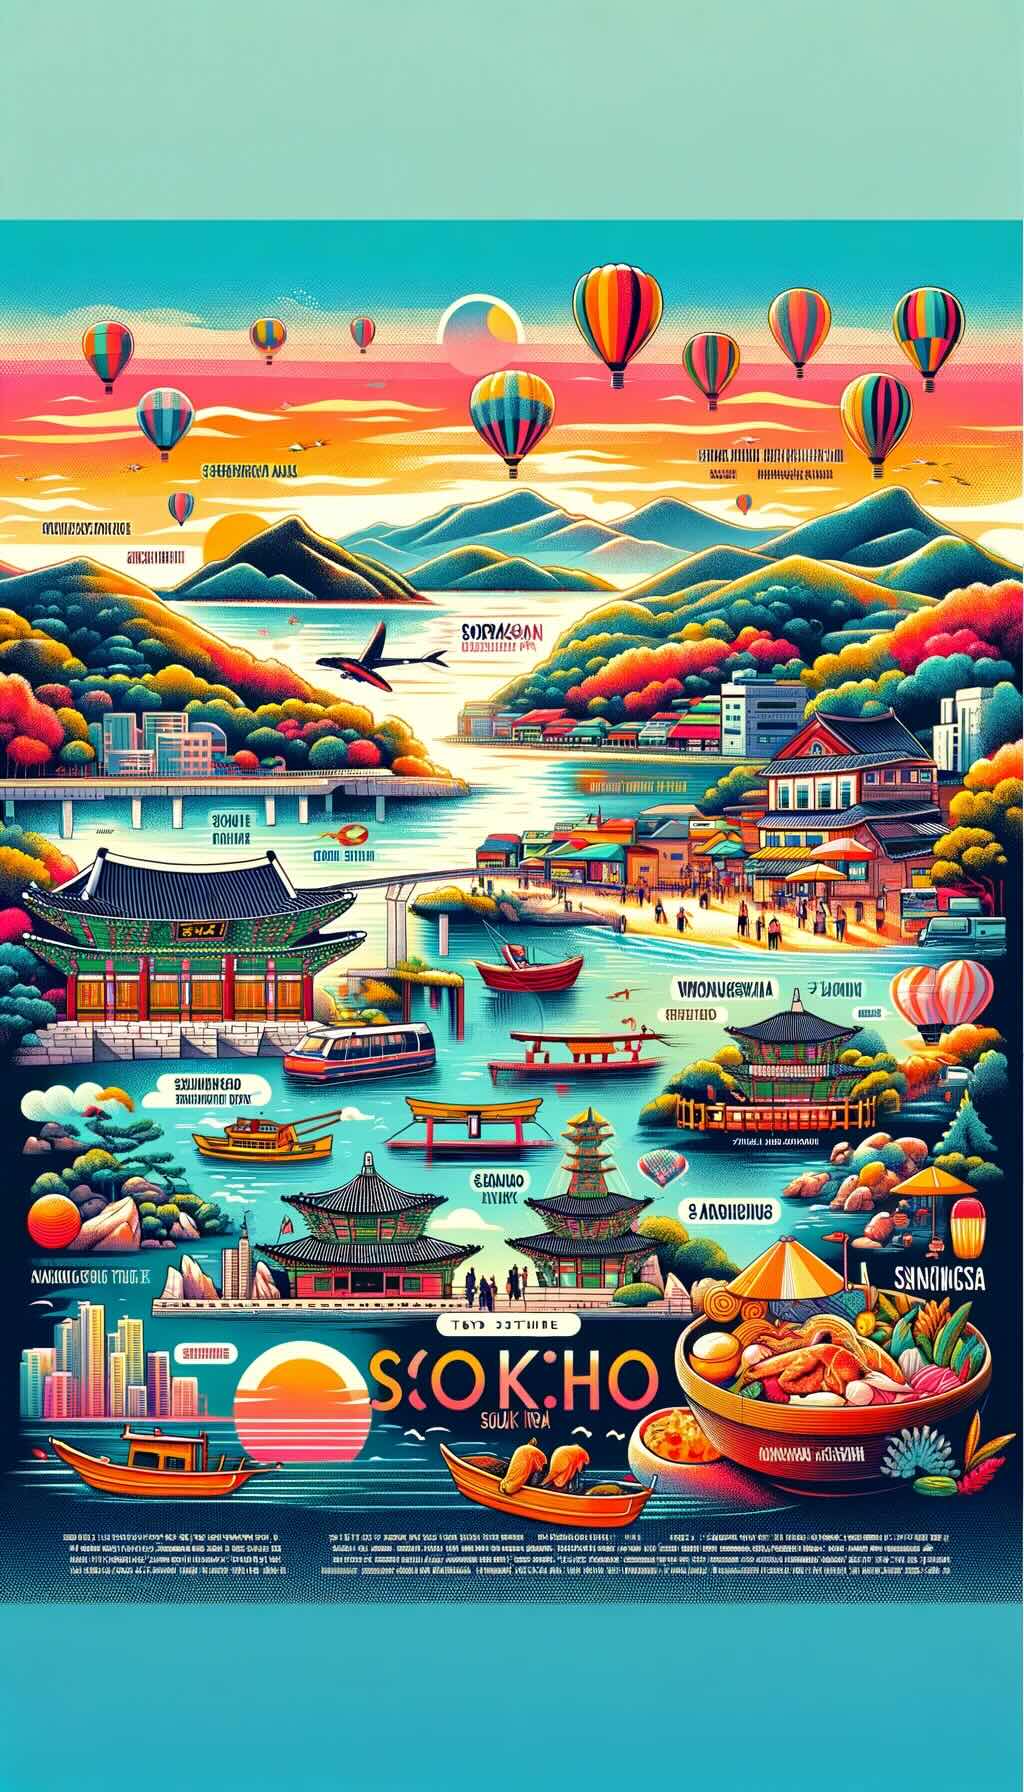 Top 10 things to do in Sokcho, South Korea with each attraction vividly captured to create an engaging and comprehensive travel poster for visitors